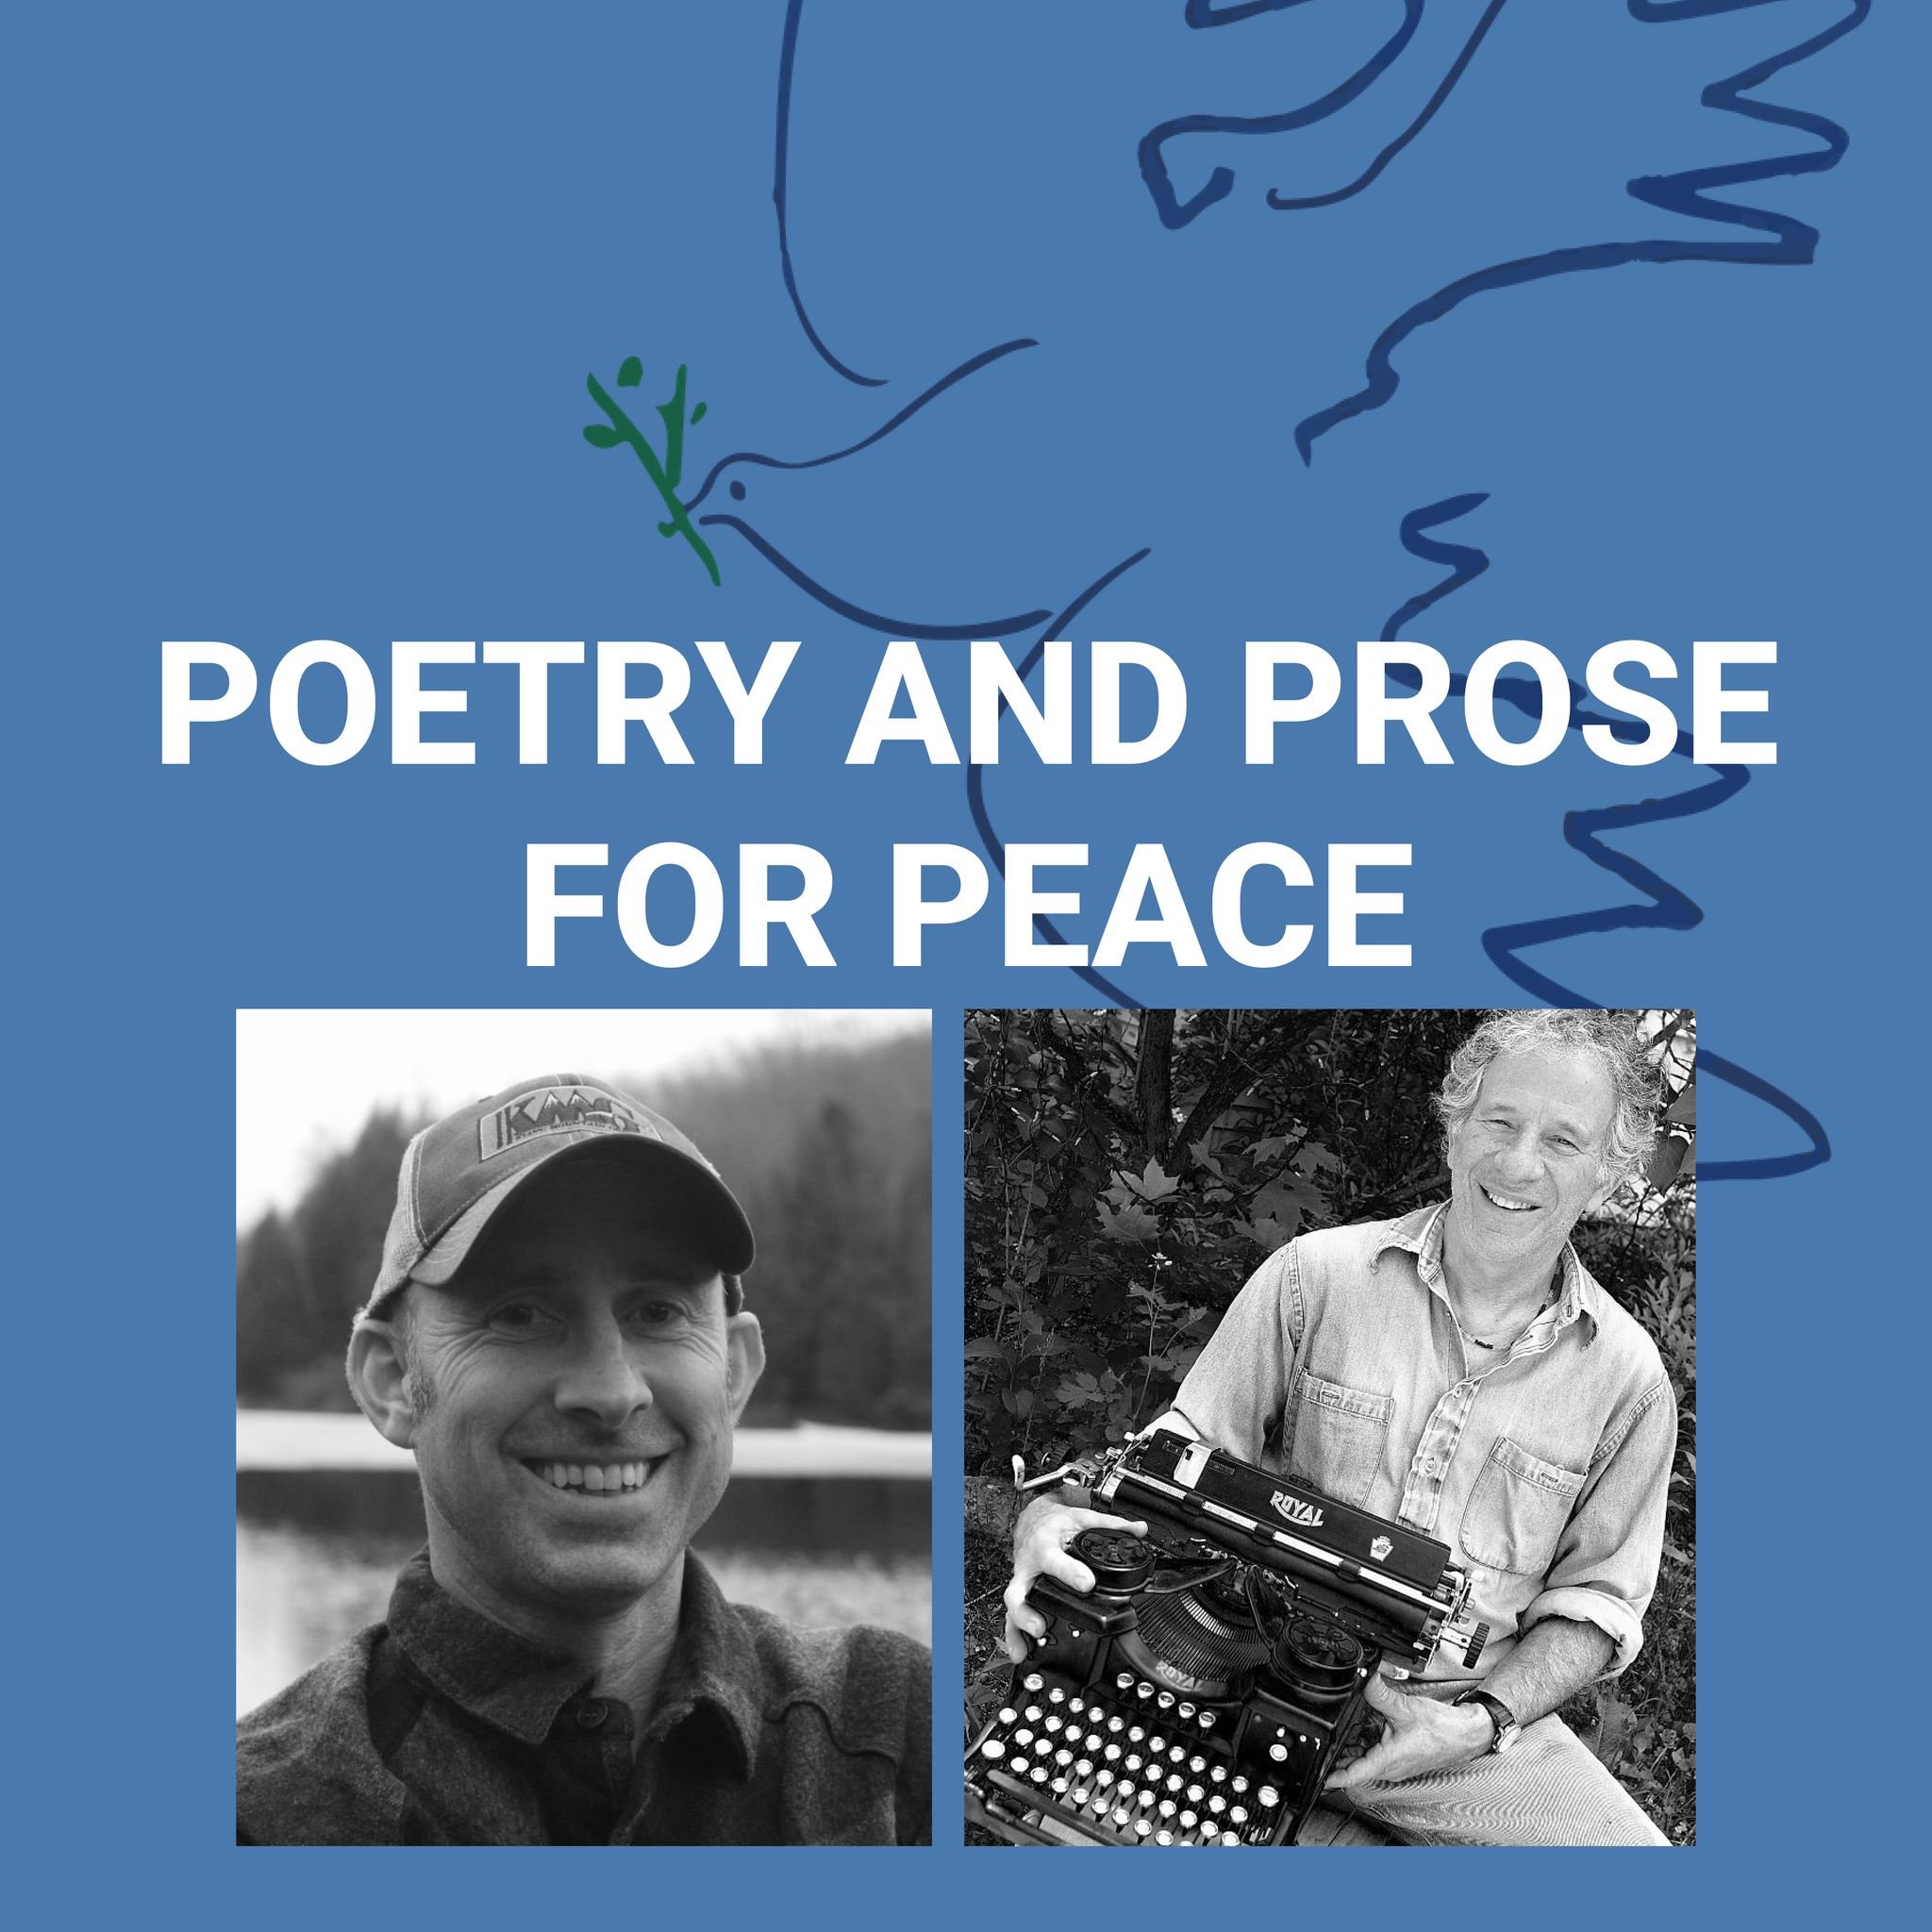 The final workshop in the series &ldquo;Poetry and Prose for Peace&rdquo; is coming!
In this culminating workshop, @petergouldvermont  Peter Gould and @seanprentiss_writer  Sean Prentiss will come together to discuss the overlap and interdependence o